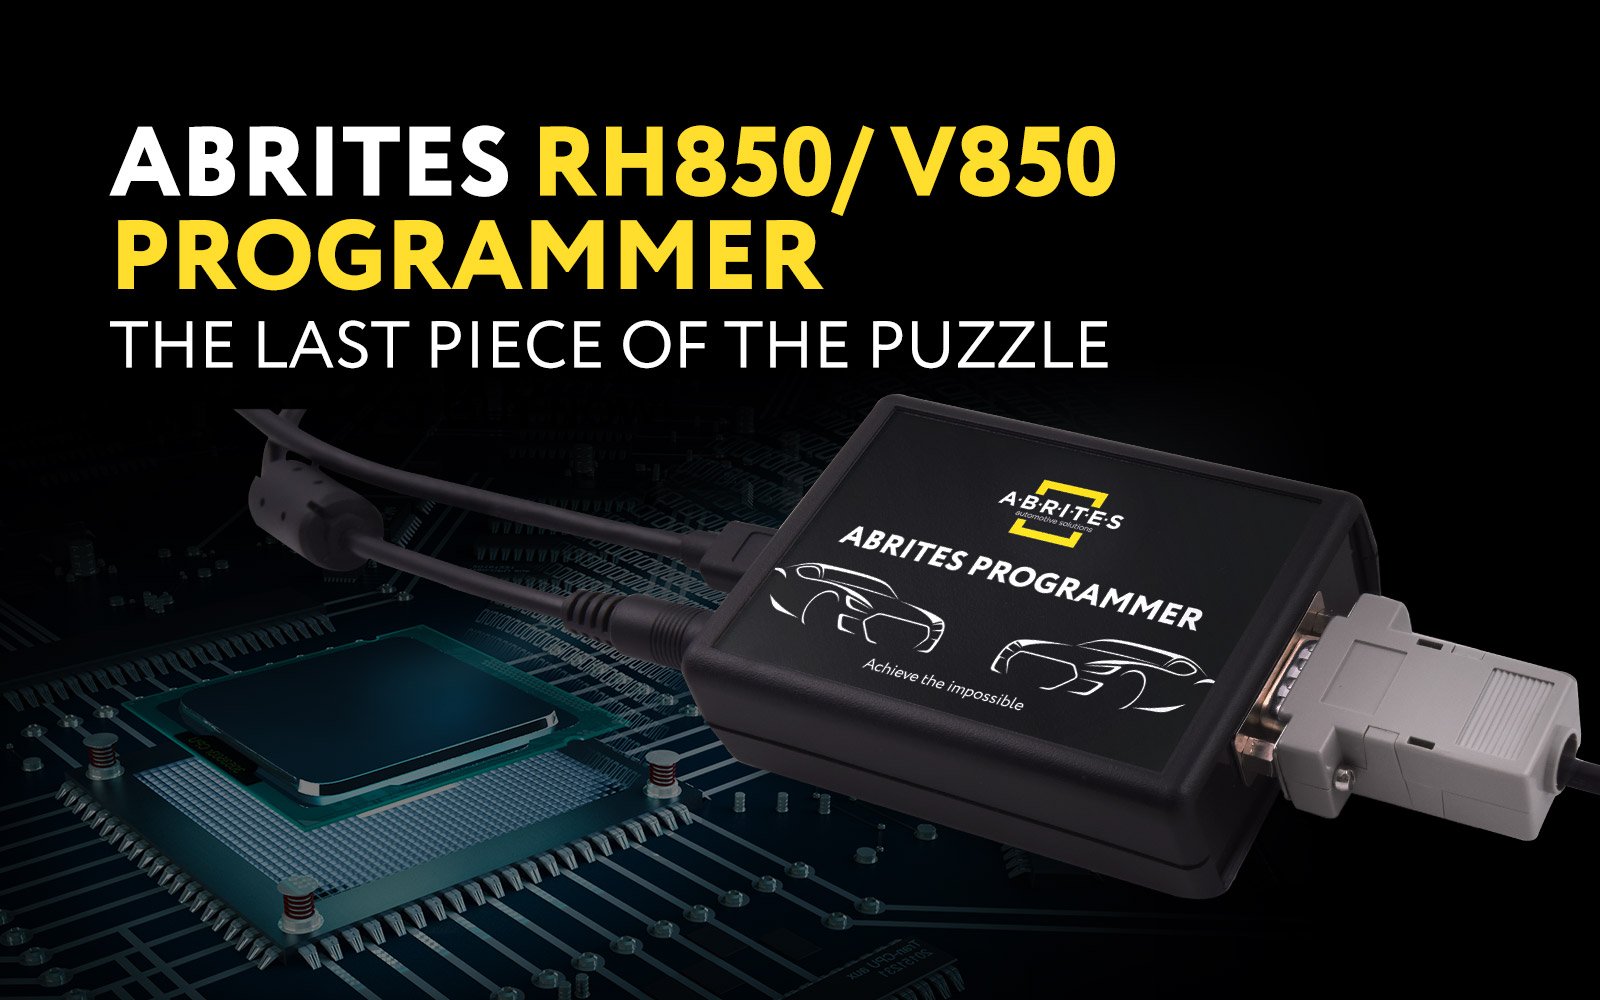 ABRITES RH850/ V850 PROGRAMMER, THE LAST PIECE OF THE PUZZLE